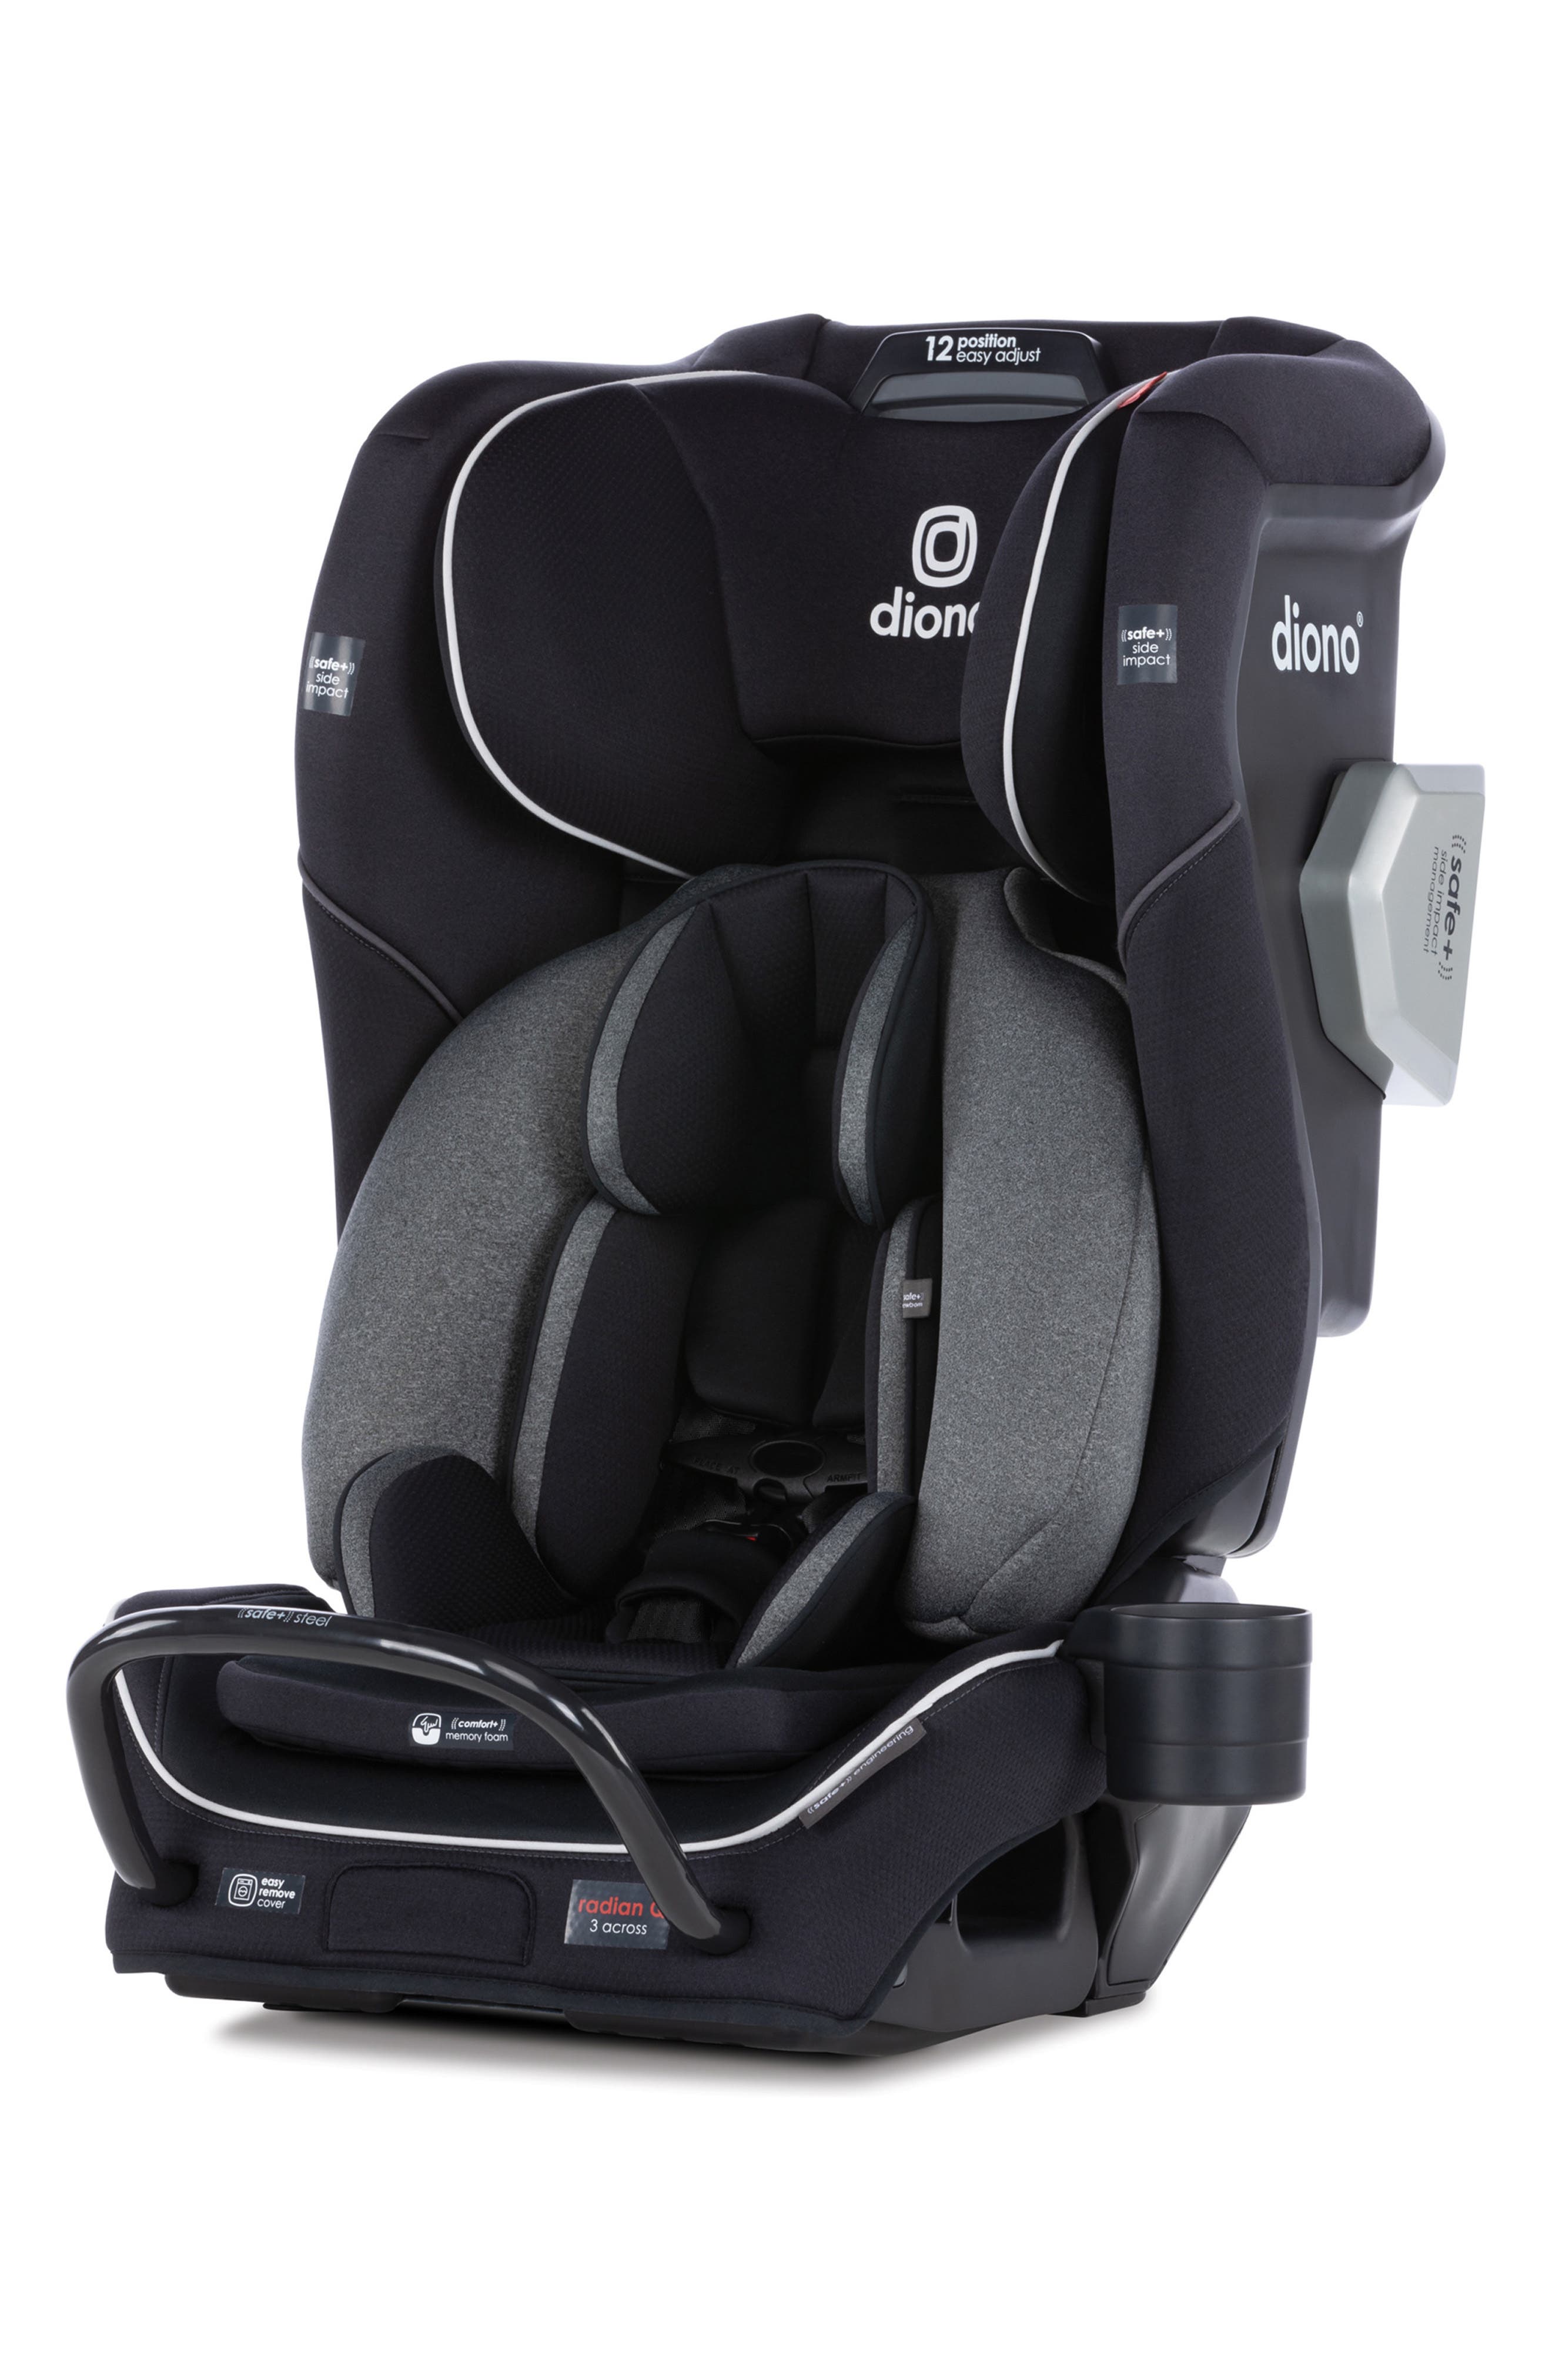 Diono radian(R) 3QXT All-in-One Convertible Car Seat in Black Jet